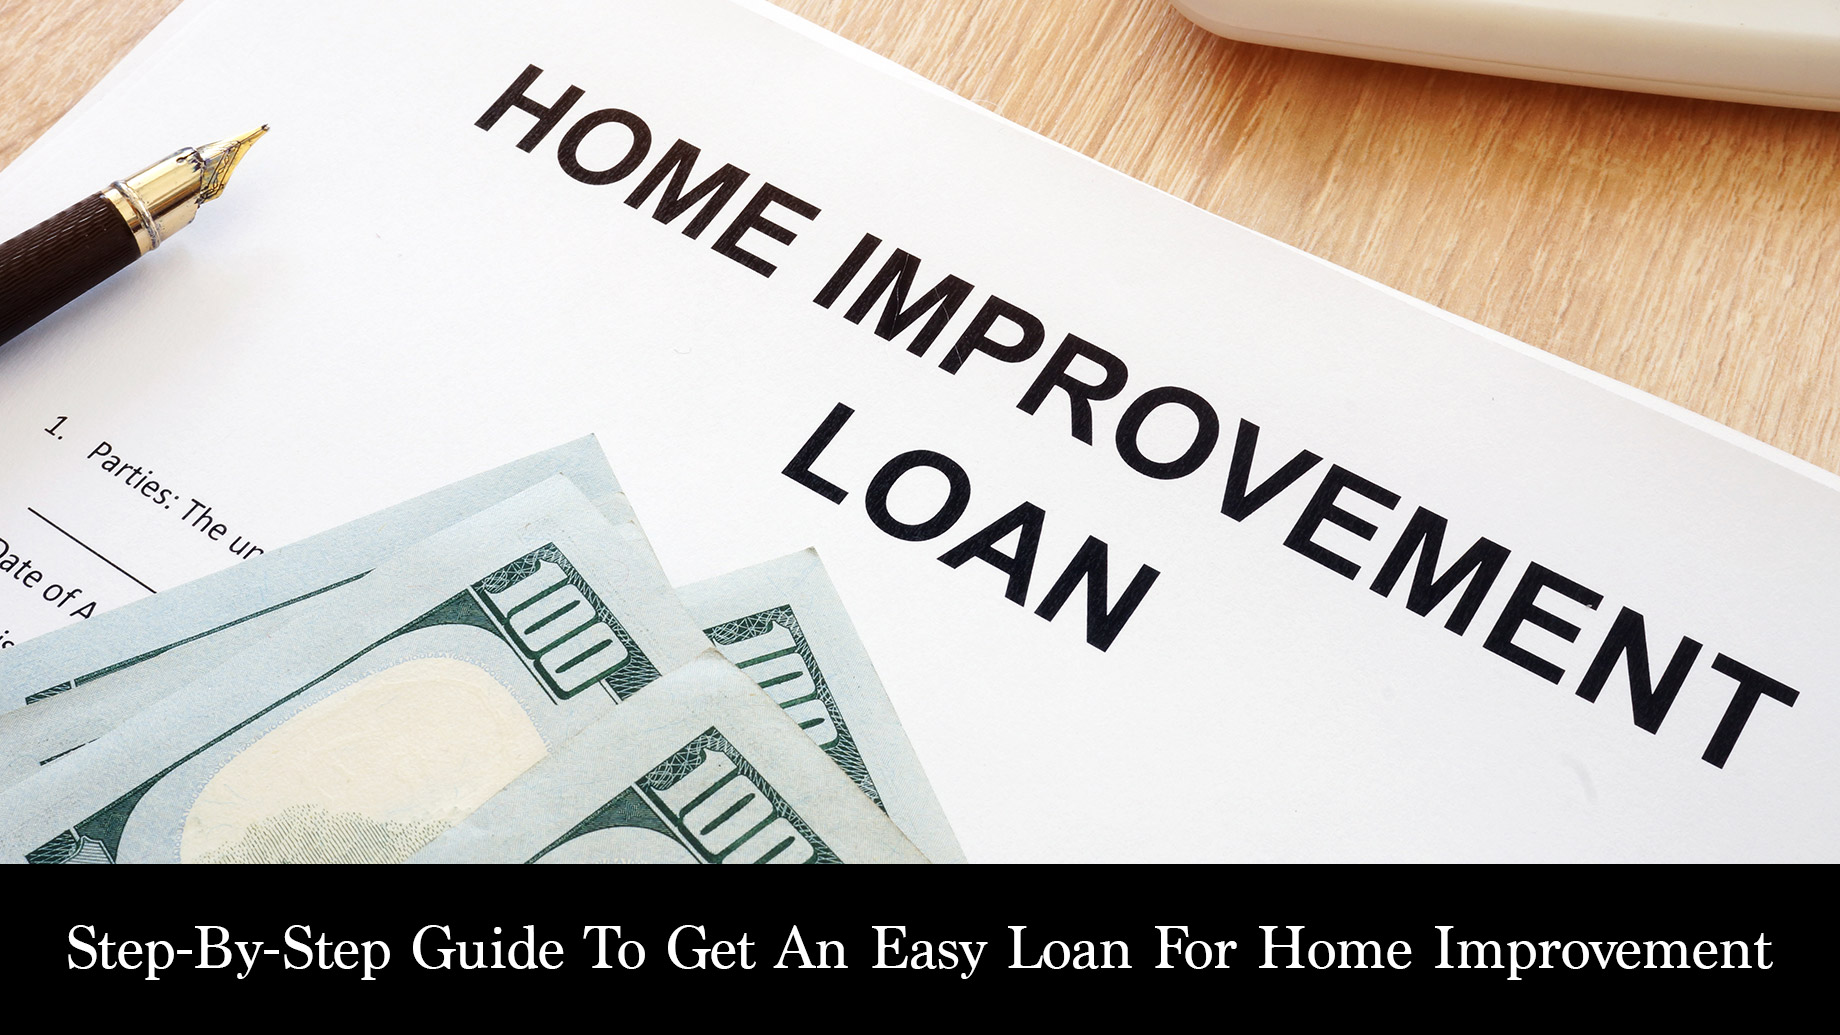 Step-By-Step Guide To Get An Easy Loan For Home Improvement